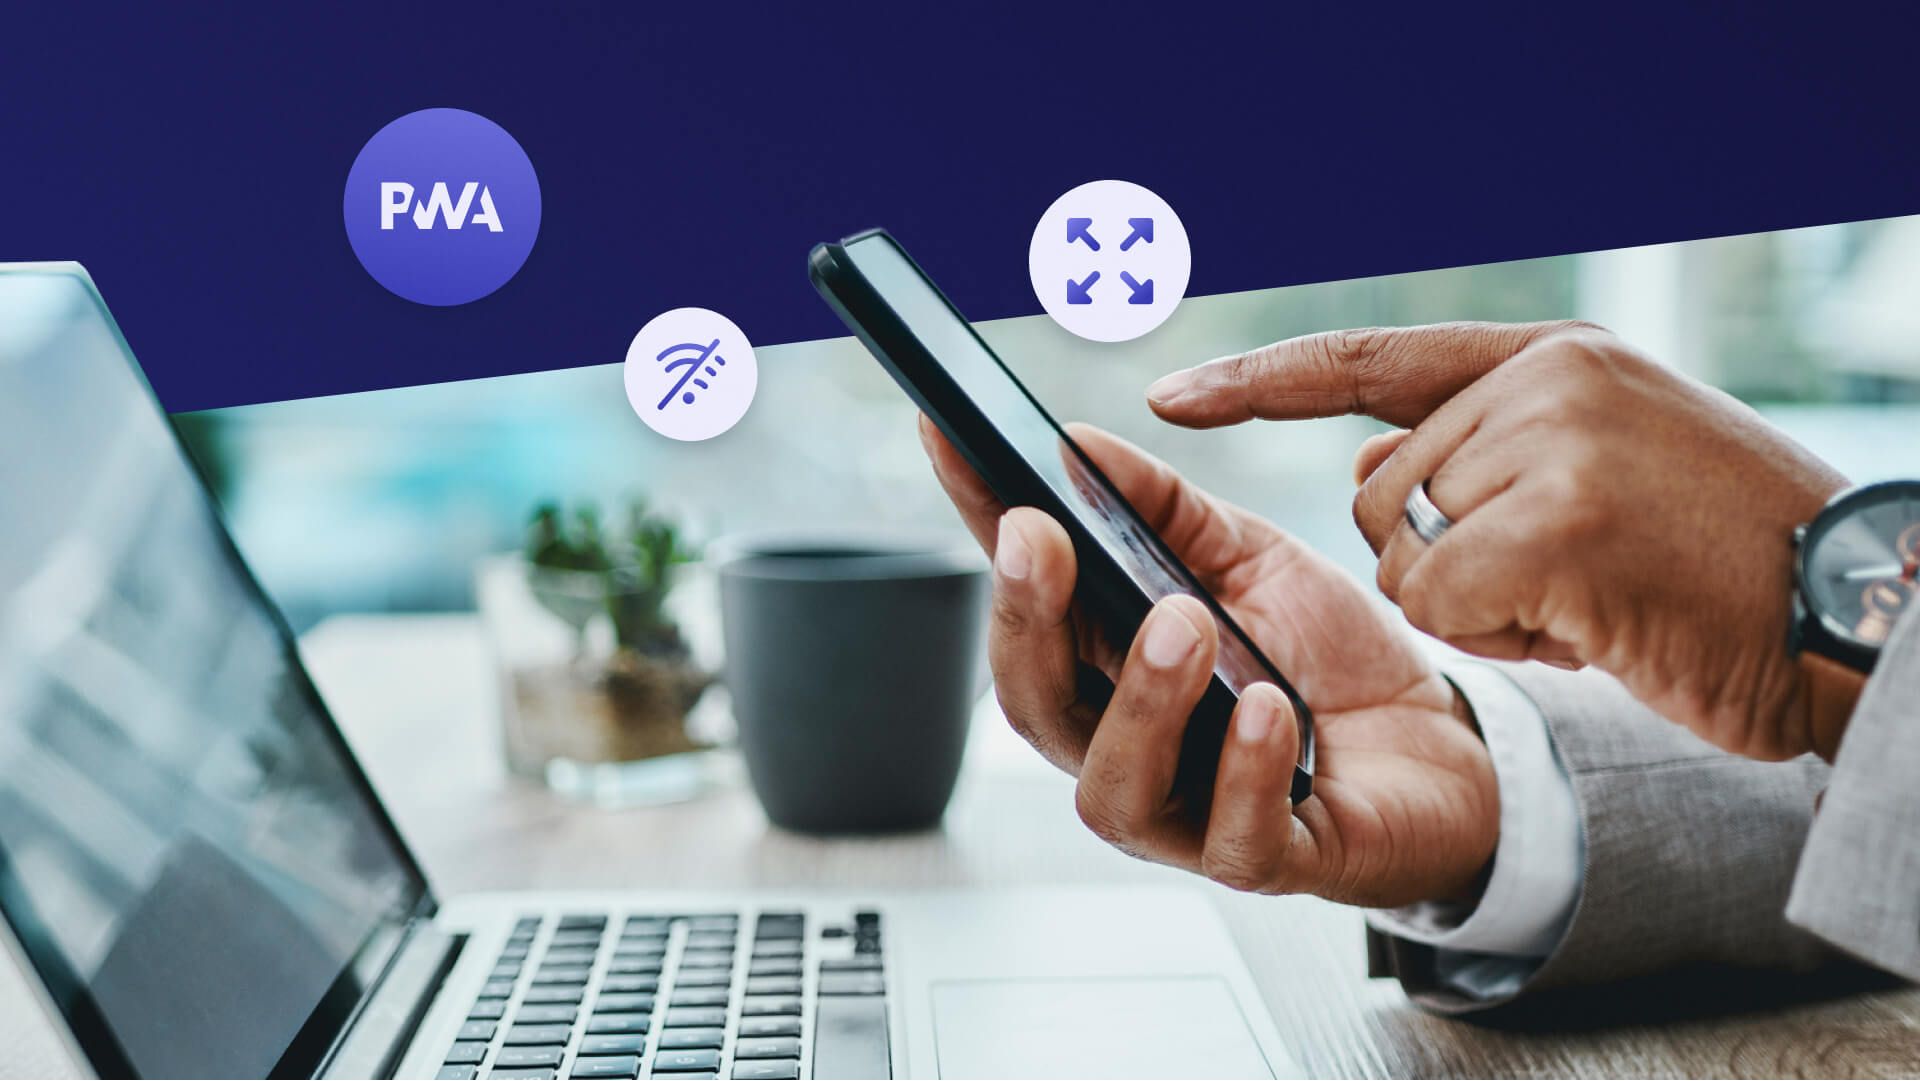 What are the key benefits and features of a PWA?